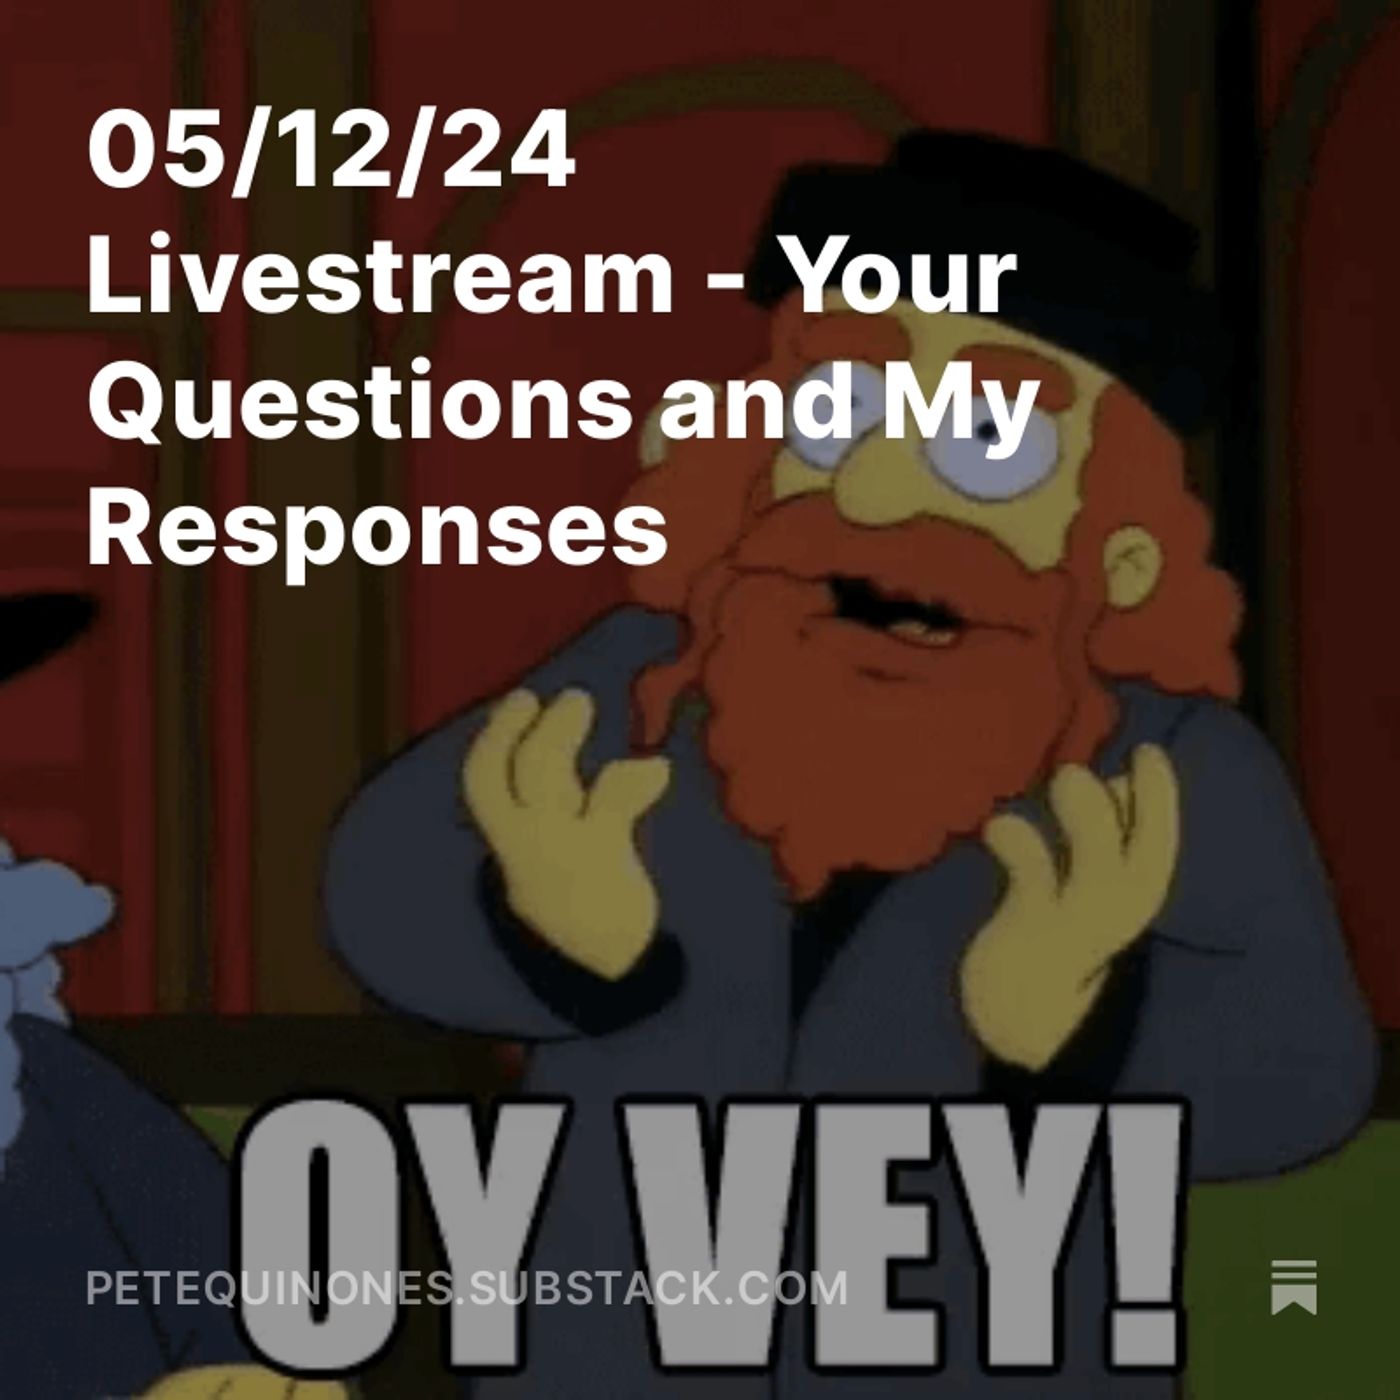 05/12/24 Livestream - Your Questions and My Responses